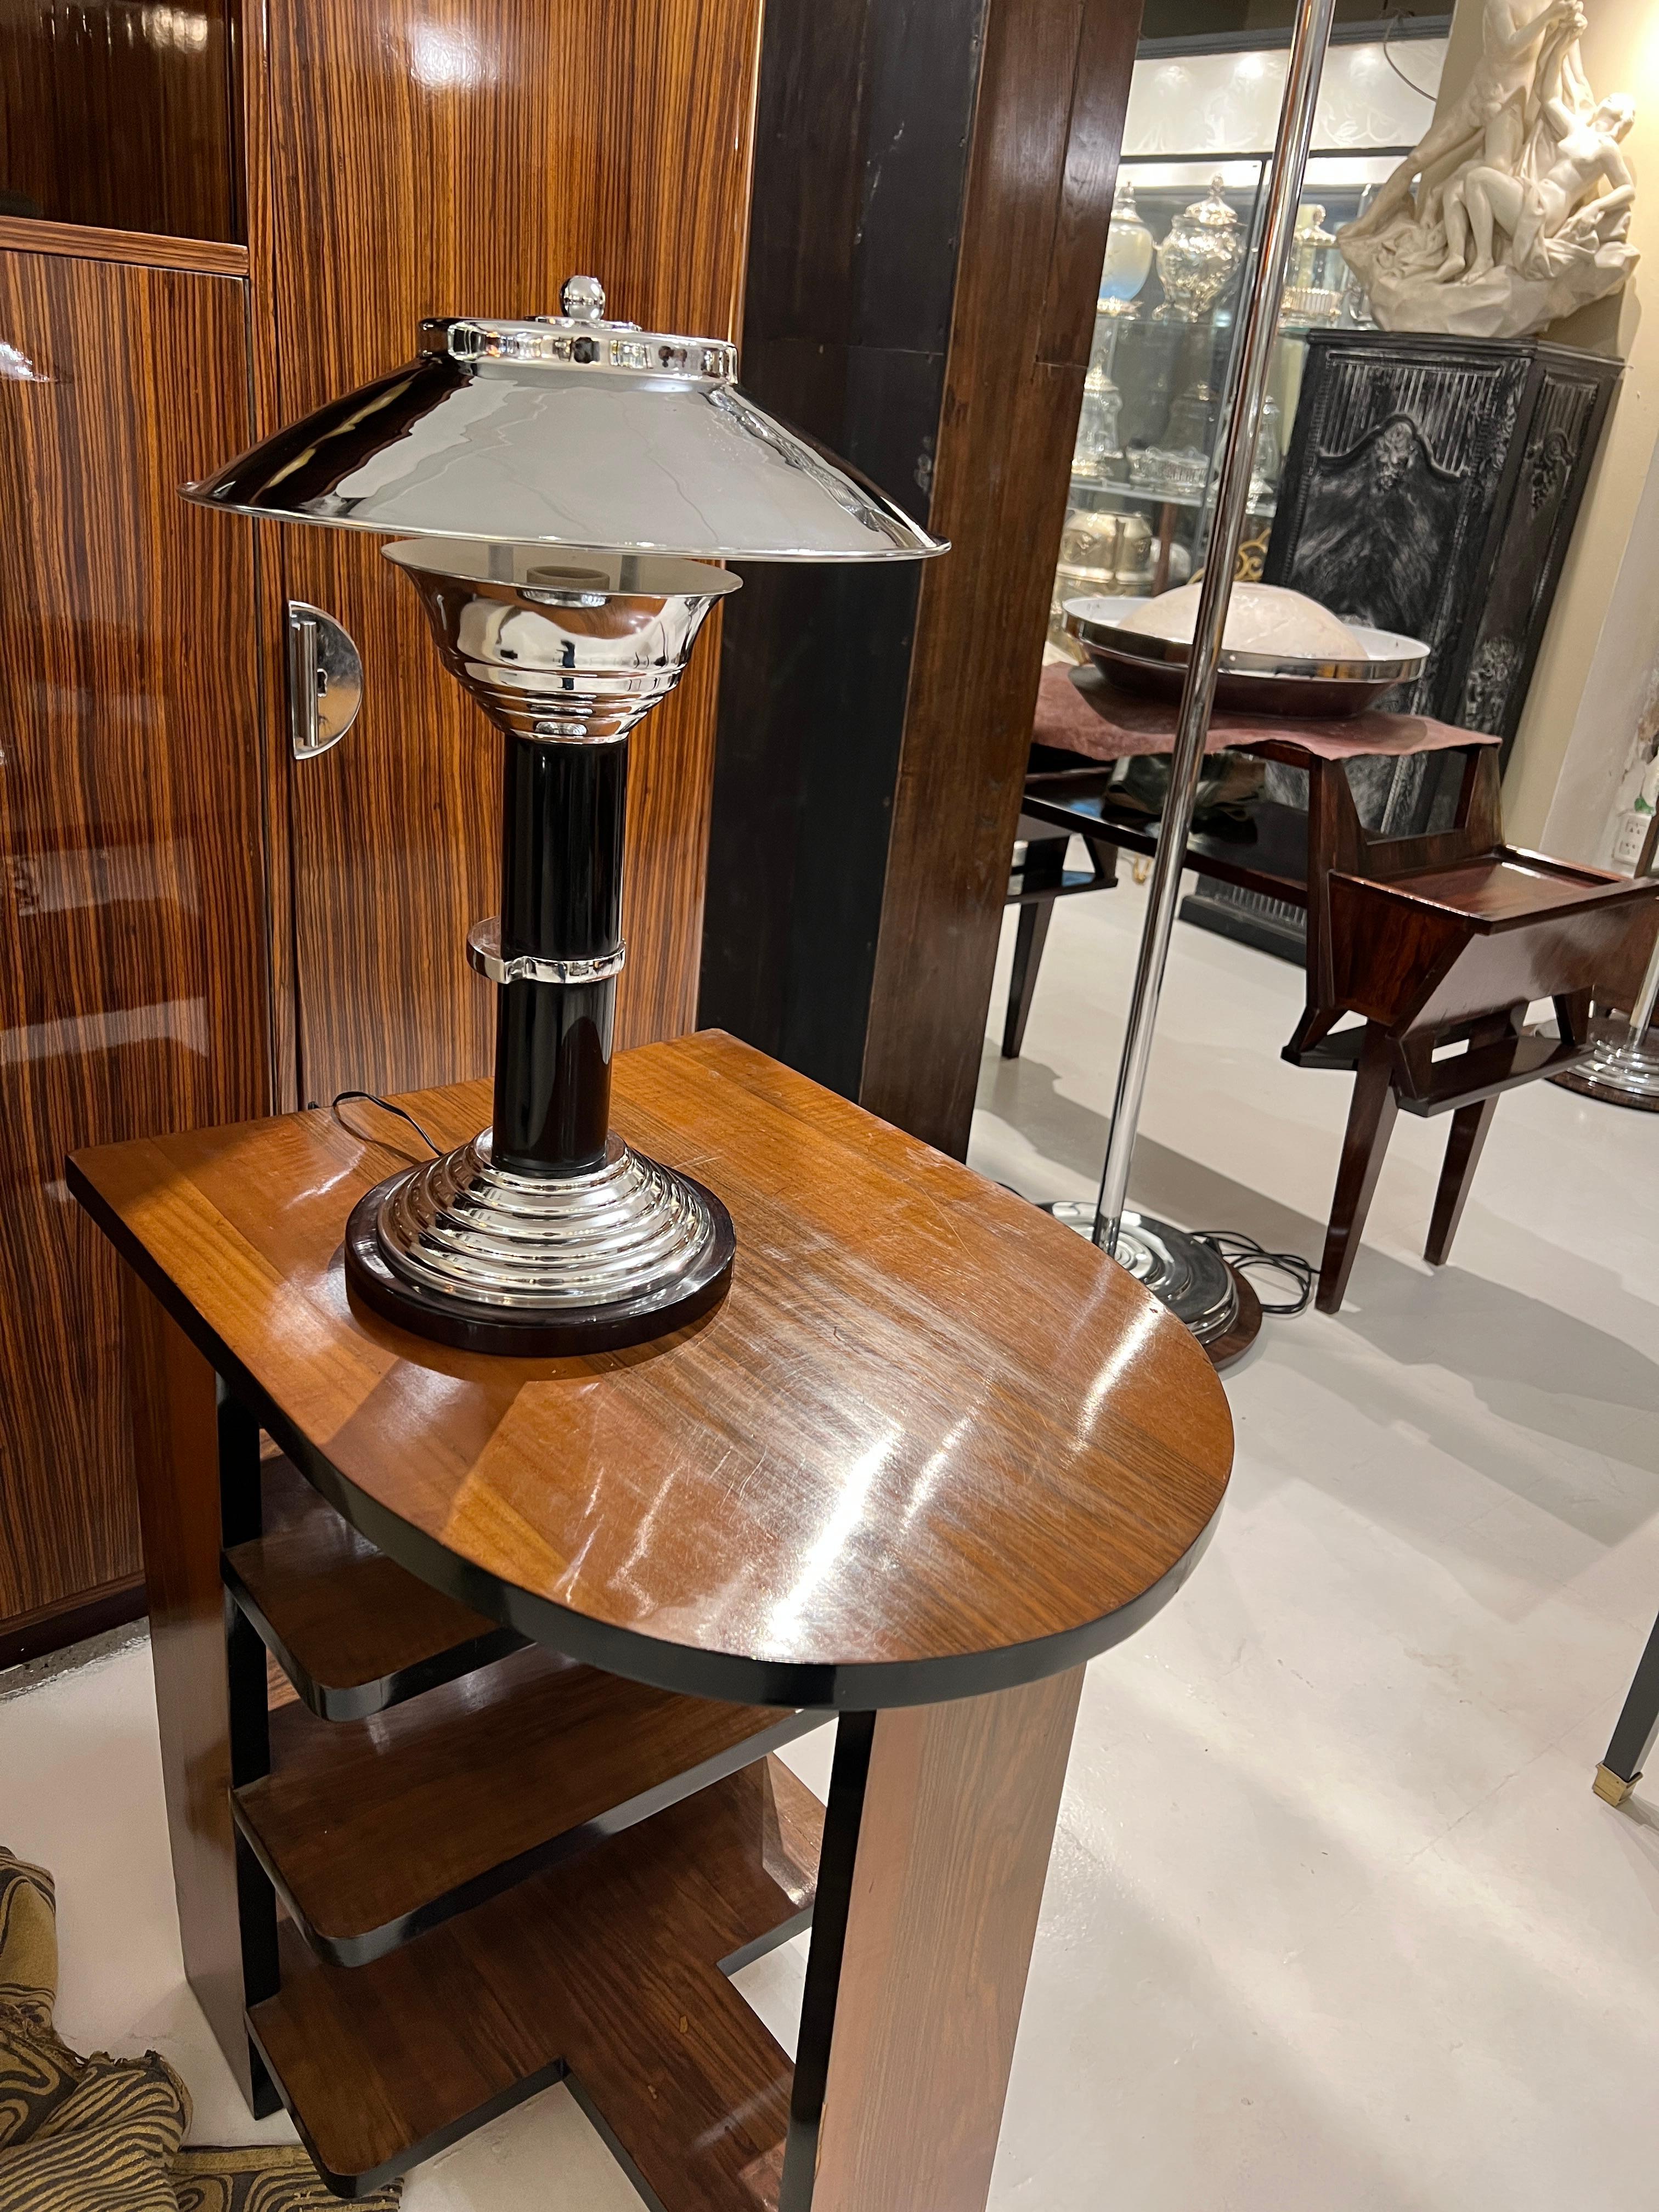 Pair of Art Deco Table Lamps in wood and chrome, France, 1930 For Sale 6